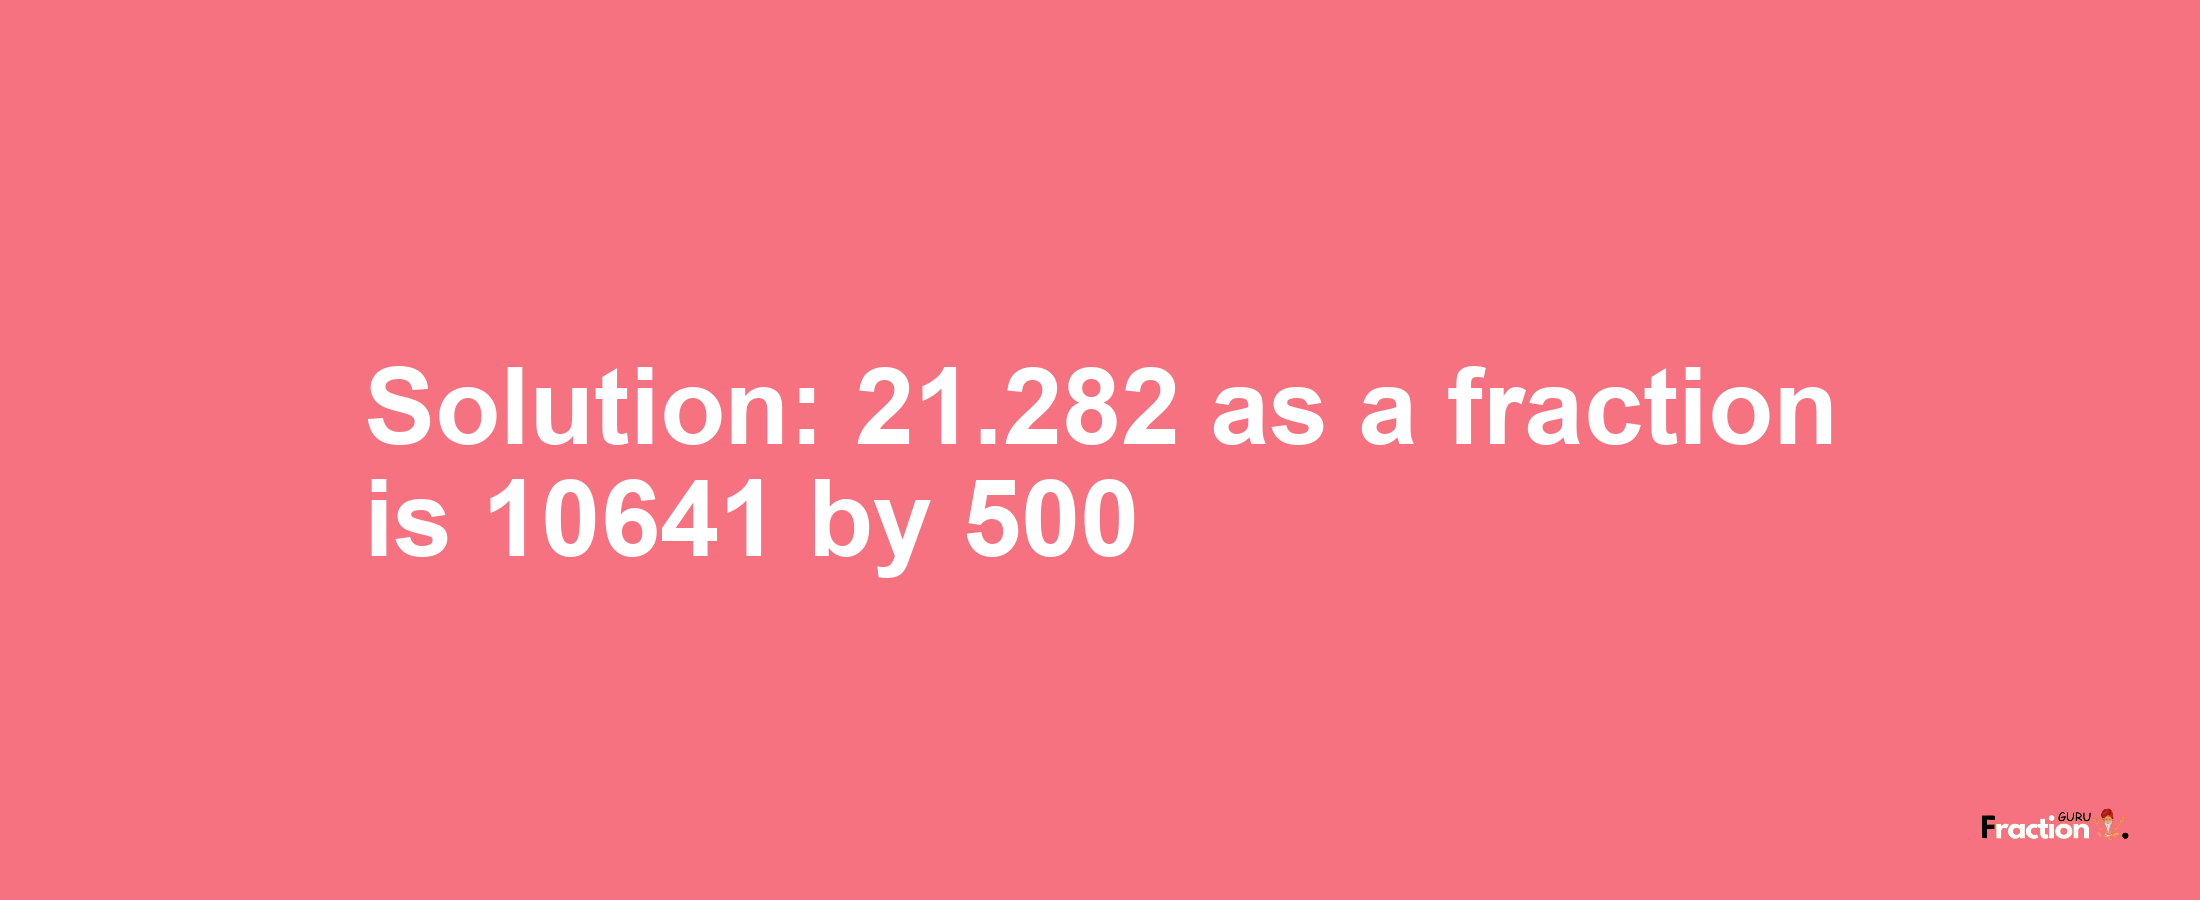 Solution:21.282 as a fraction is 10641/500